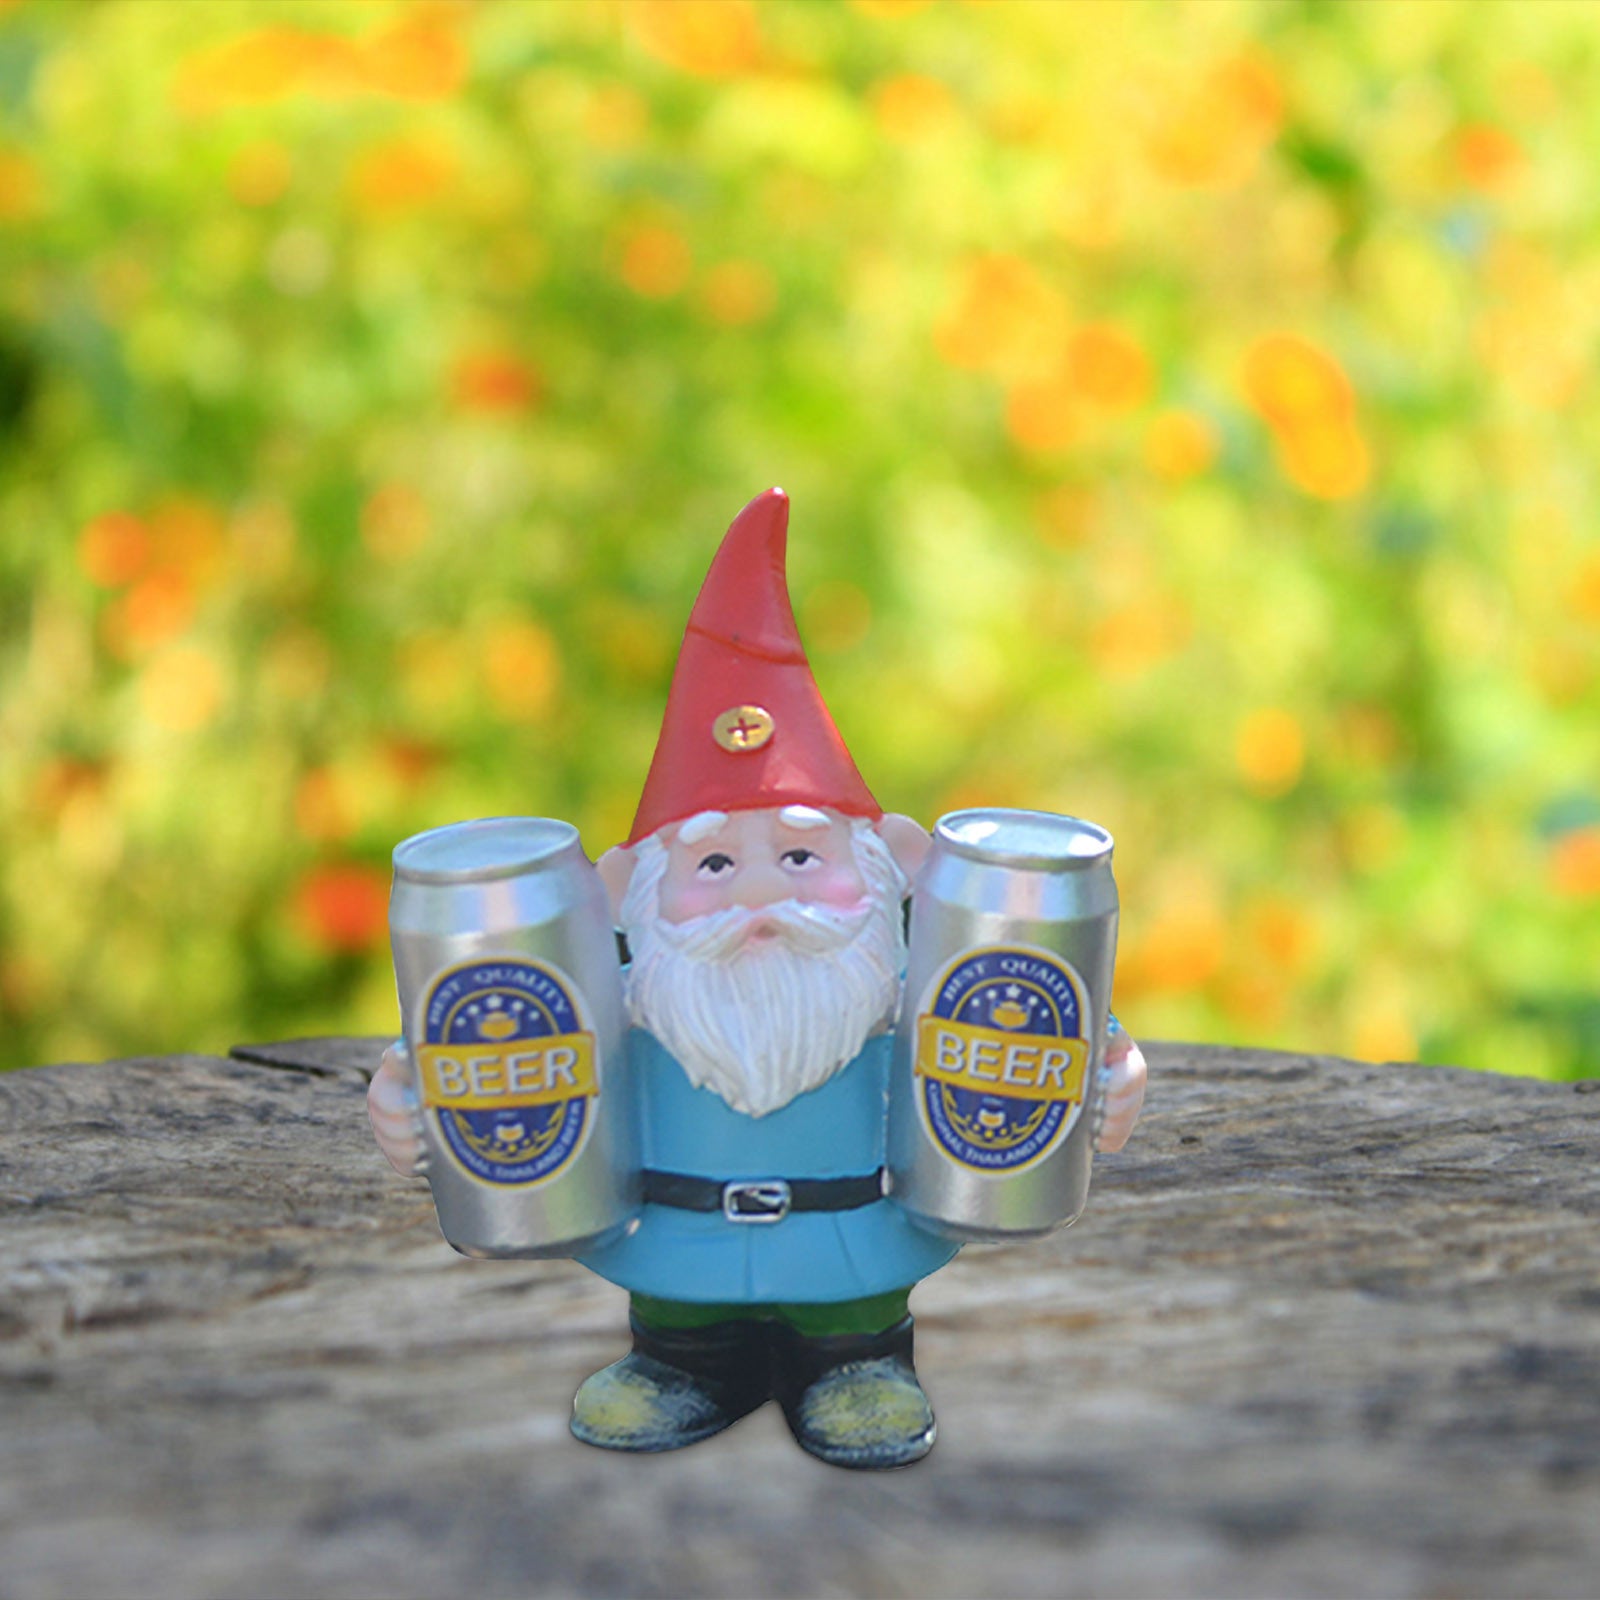 Resin Crafts Drinking Beer Old Man Ornaments, Garden Gnomes, Outdoor garden Gnomes, Resin Craft Old Man, Garden Gnomes Ornaments, Beer Gnomes, Drinking Beer Gnomes, Drinking Beer Garden Gnomes